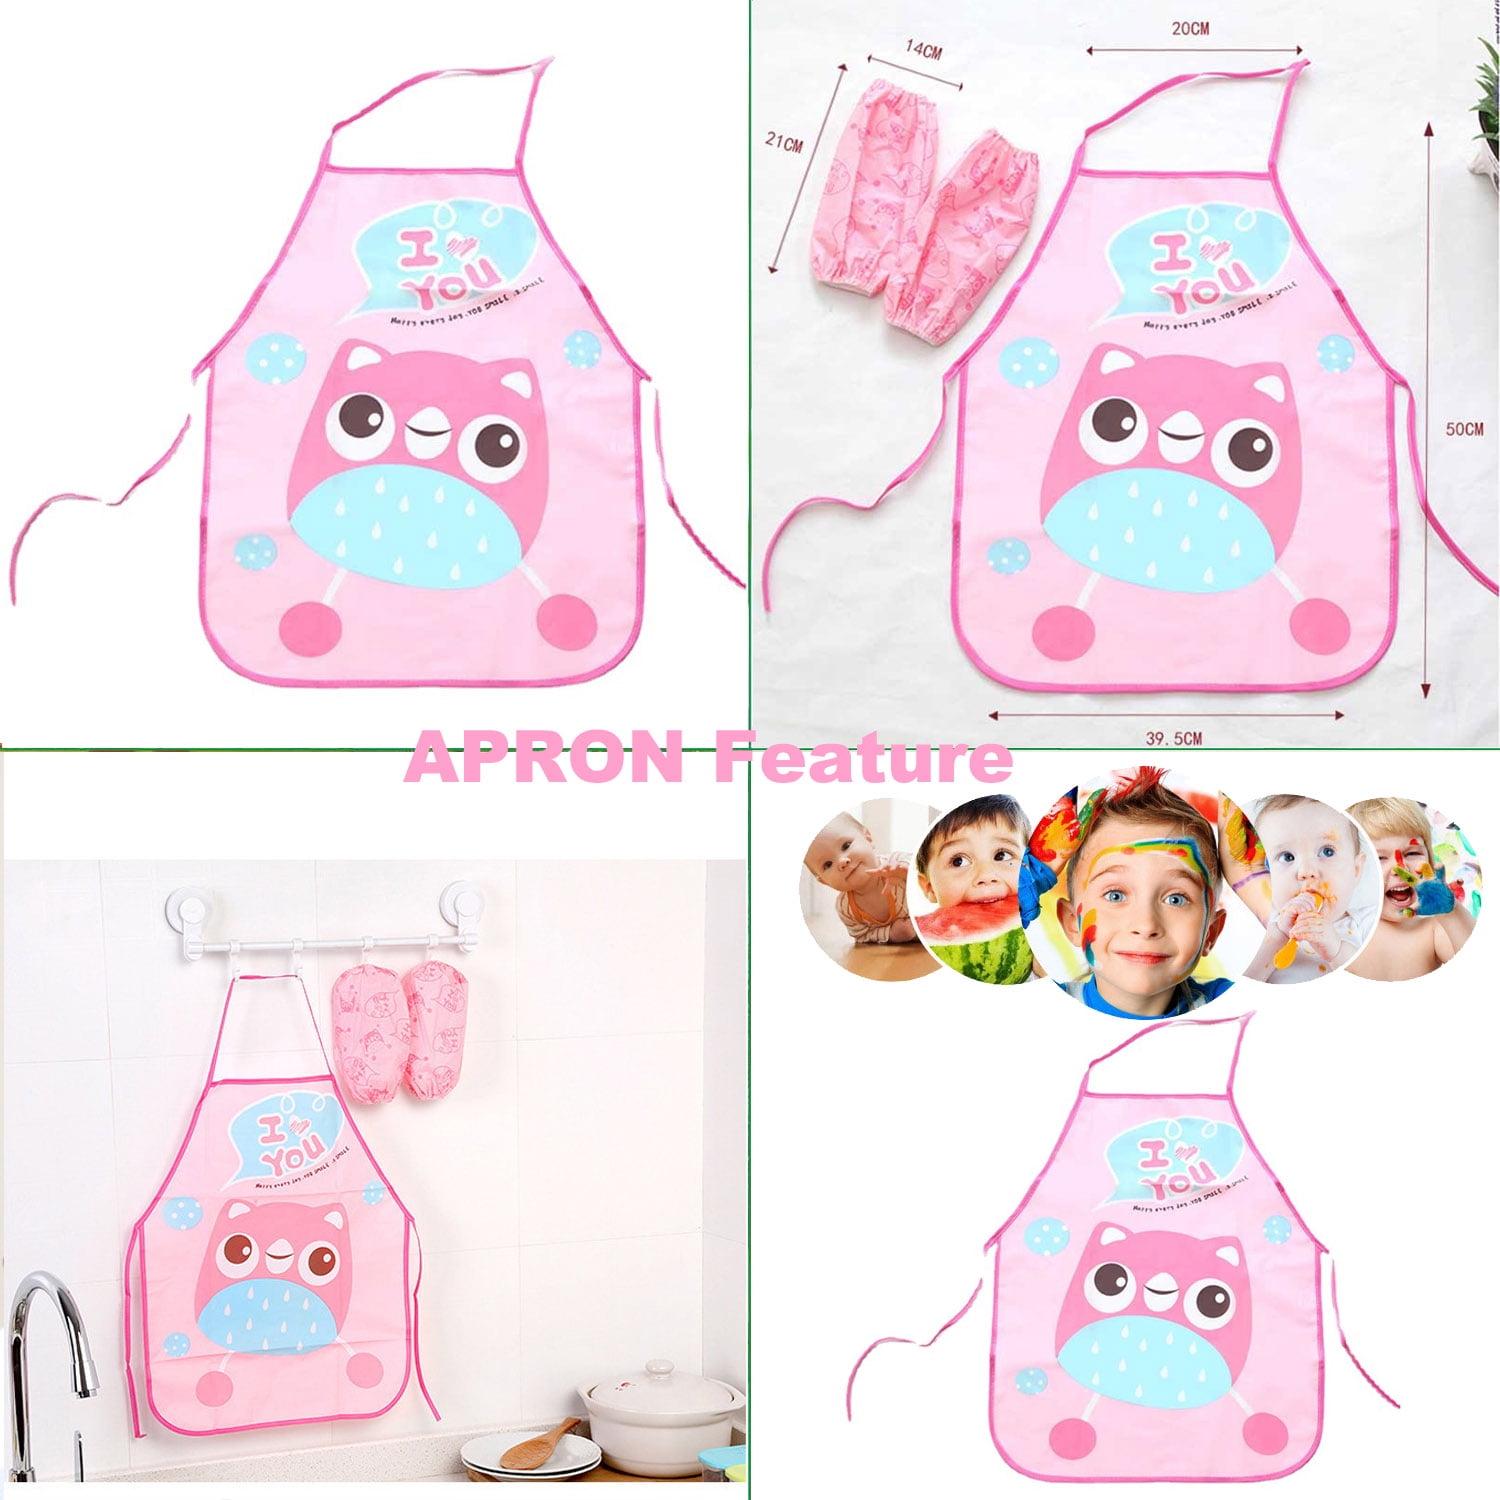 Kids Mini Mop Accessories Kids Cleaner Toys for Birthday Gifts Boys Children Pink, Girl's, Size: 20cmx9cm